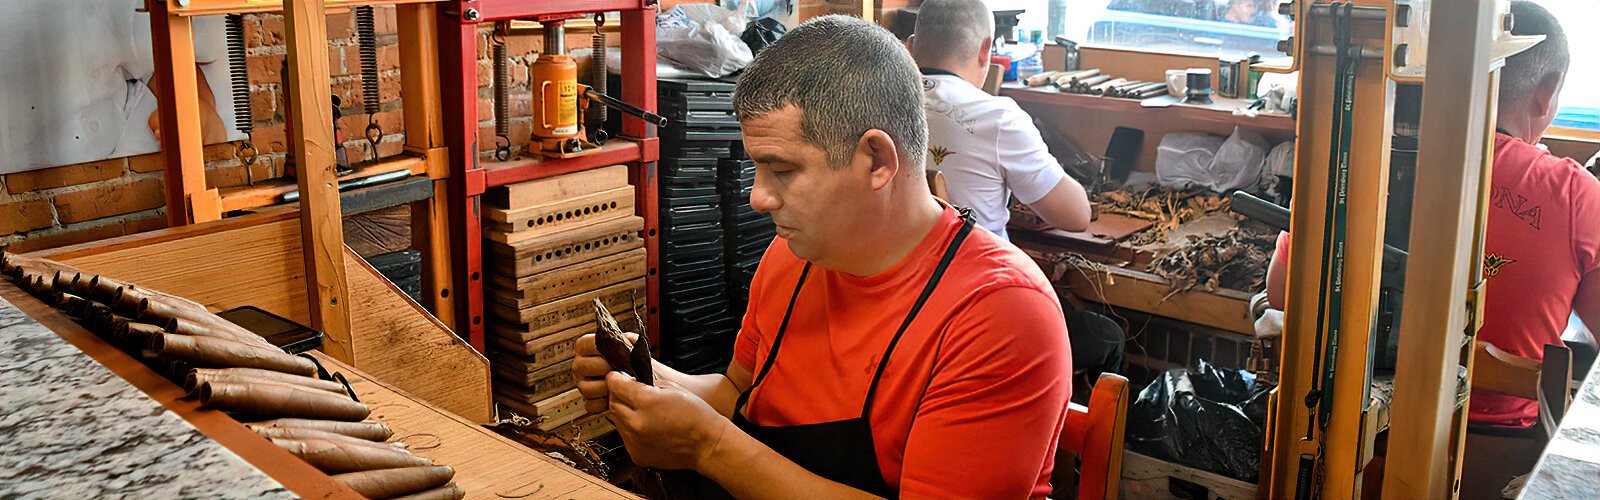  Once known as the cigar capital of the world, Ybor City has retained several shops where skilled cigar workers still hand-roll the tobacco leaves and make premium handcrafted cigars.